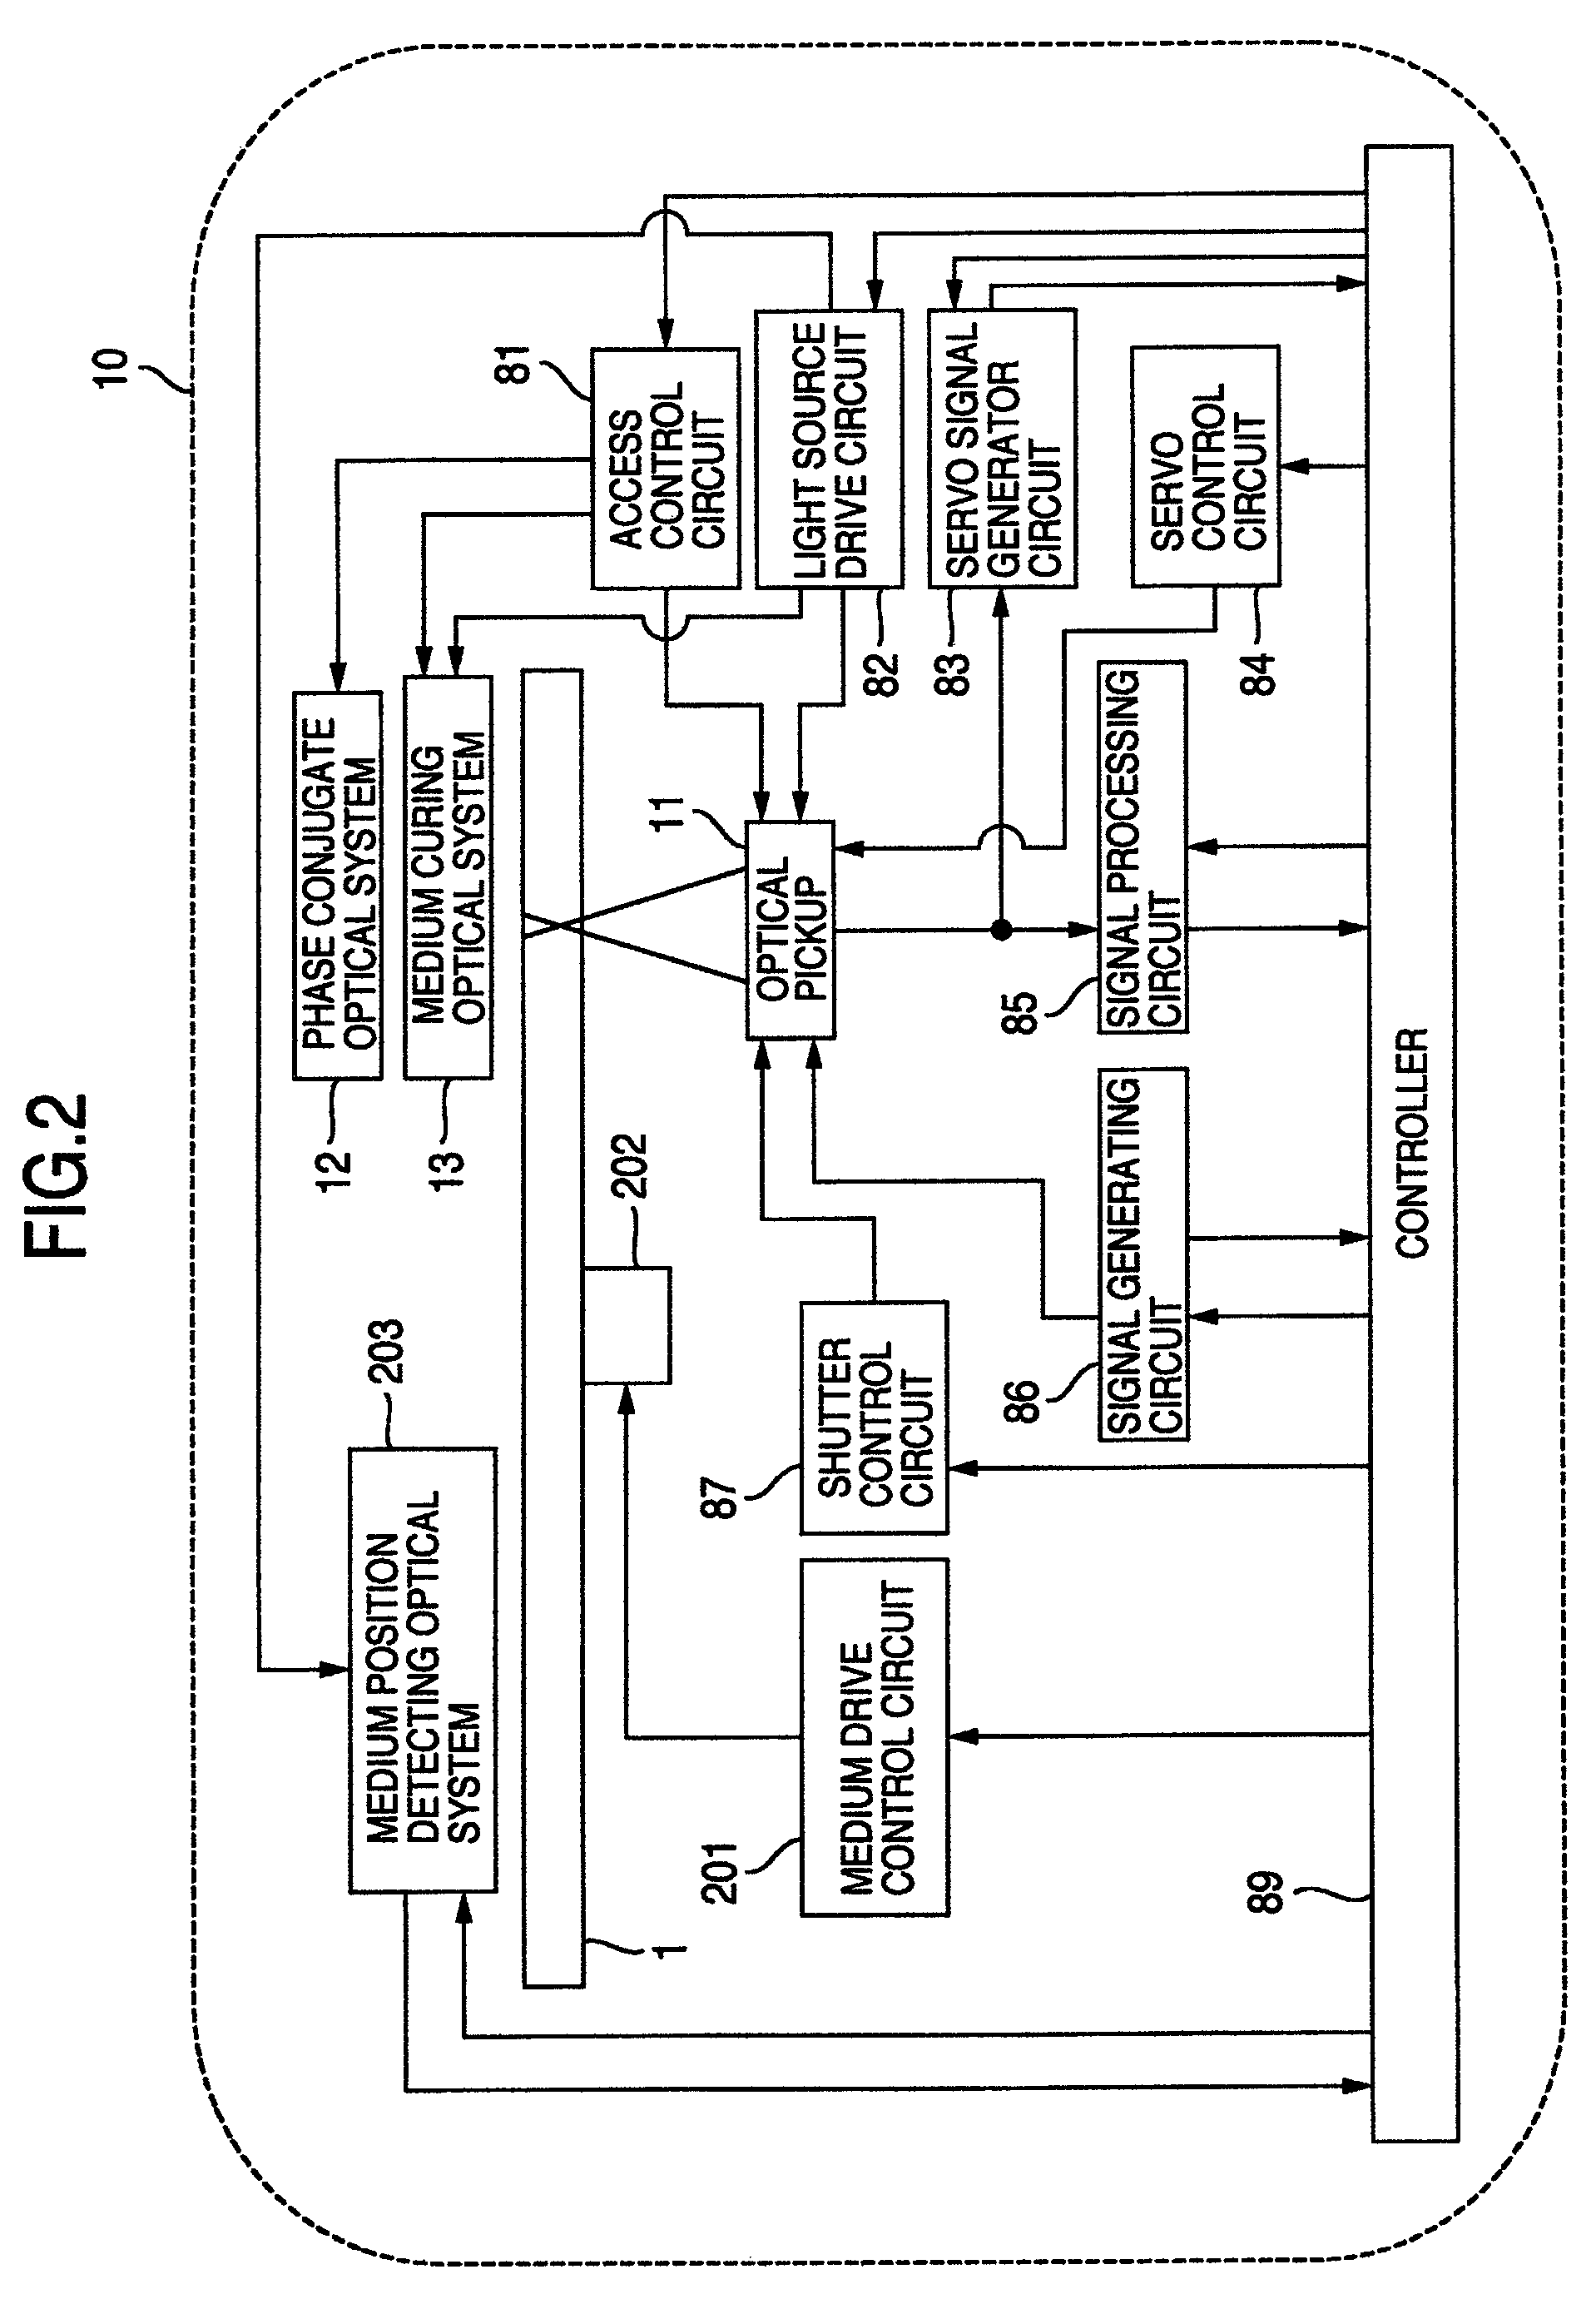 Optical pickup, optical information recording and reproducing apparatus and method for optically recording and reproducing information